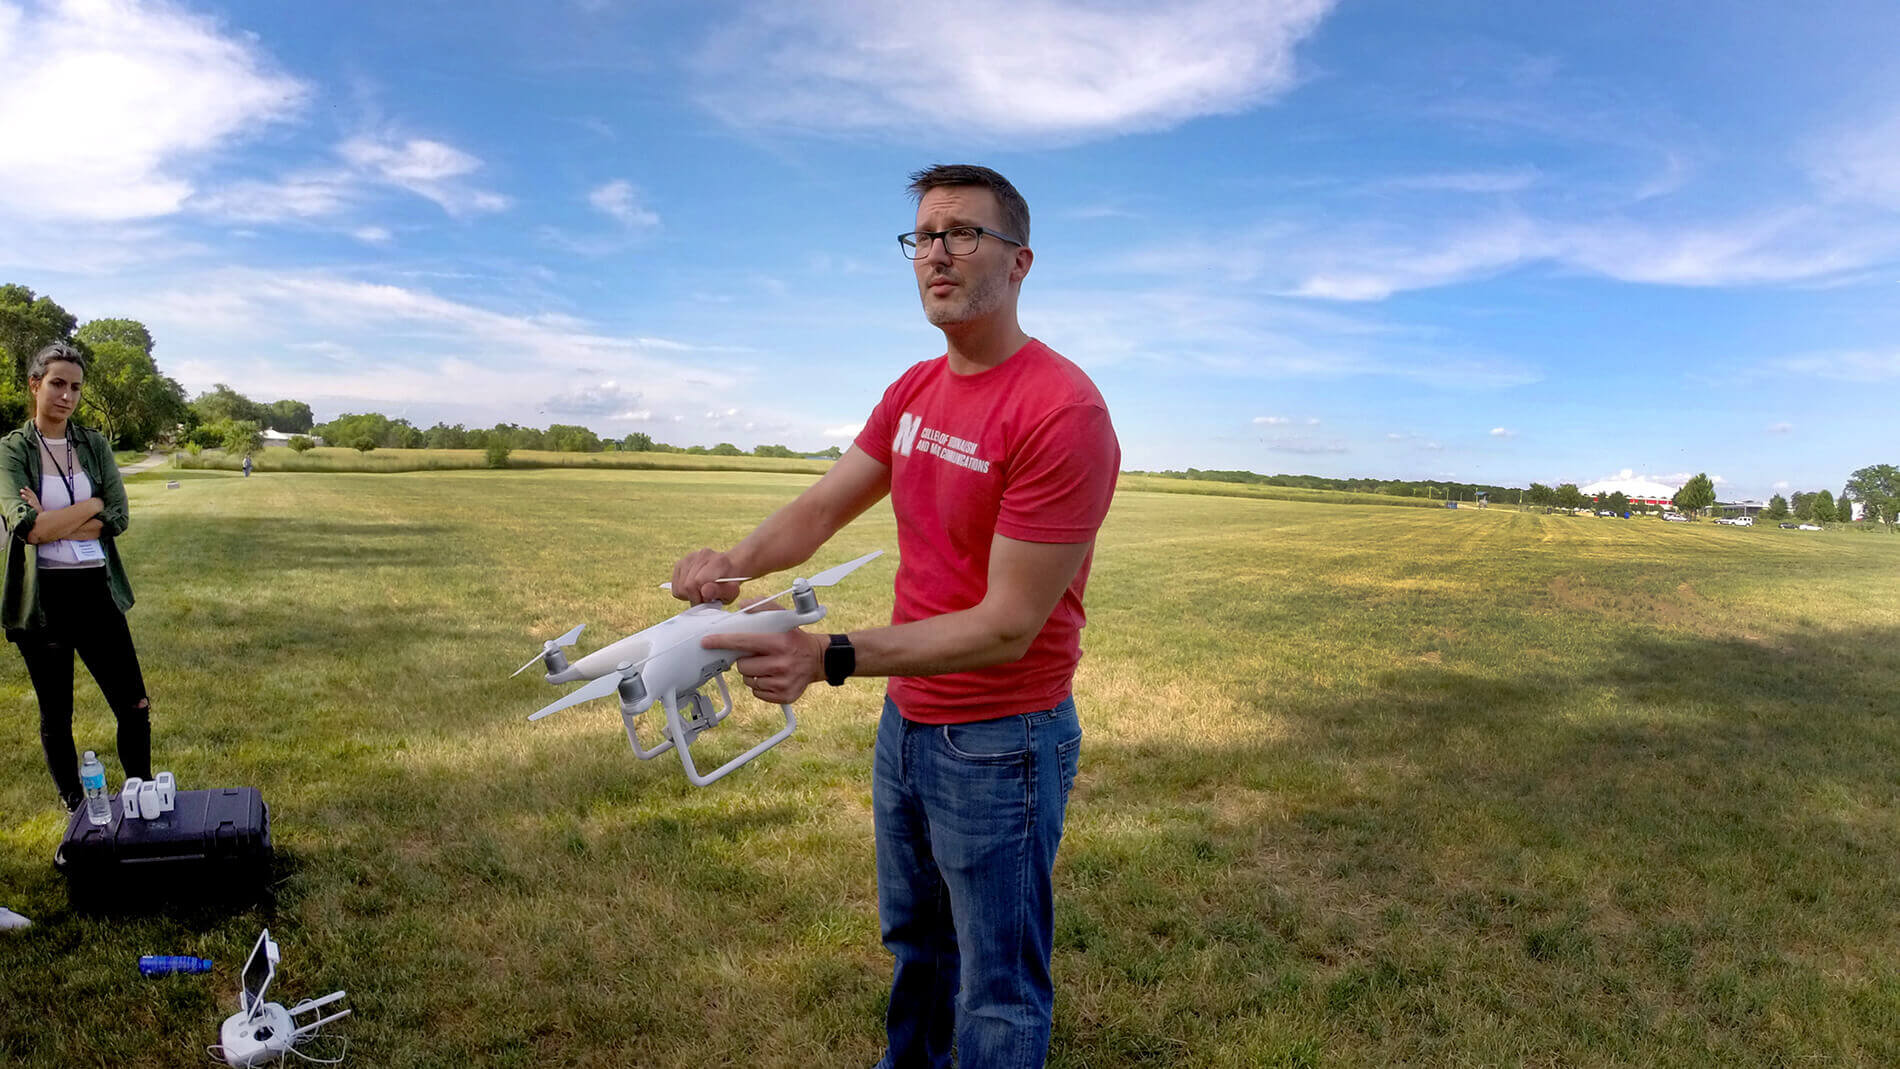 Waite holding a drone while demonstrating in a grassy field during a workshop.